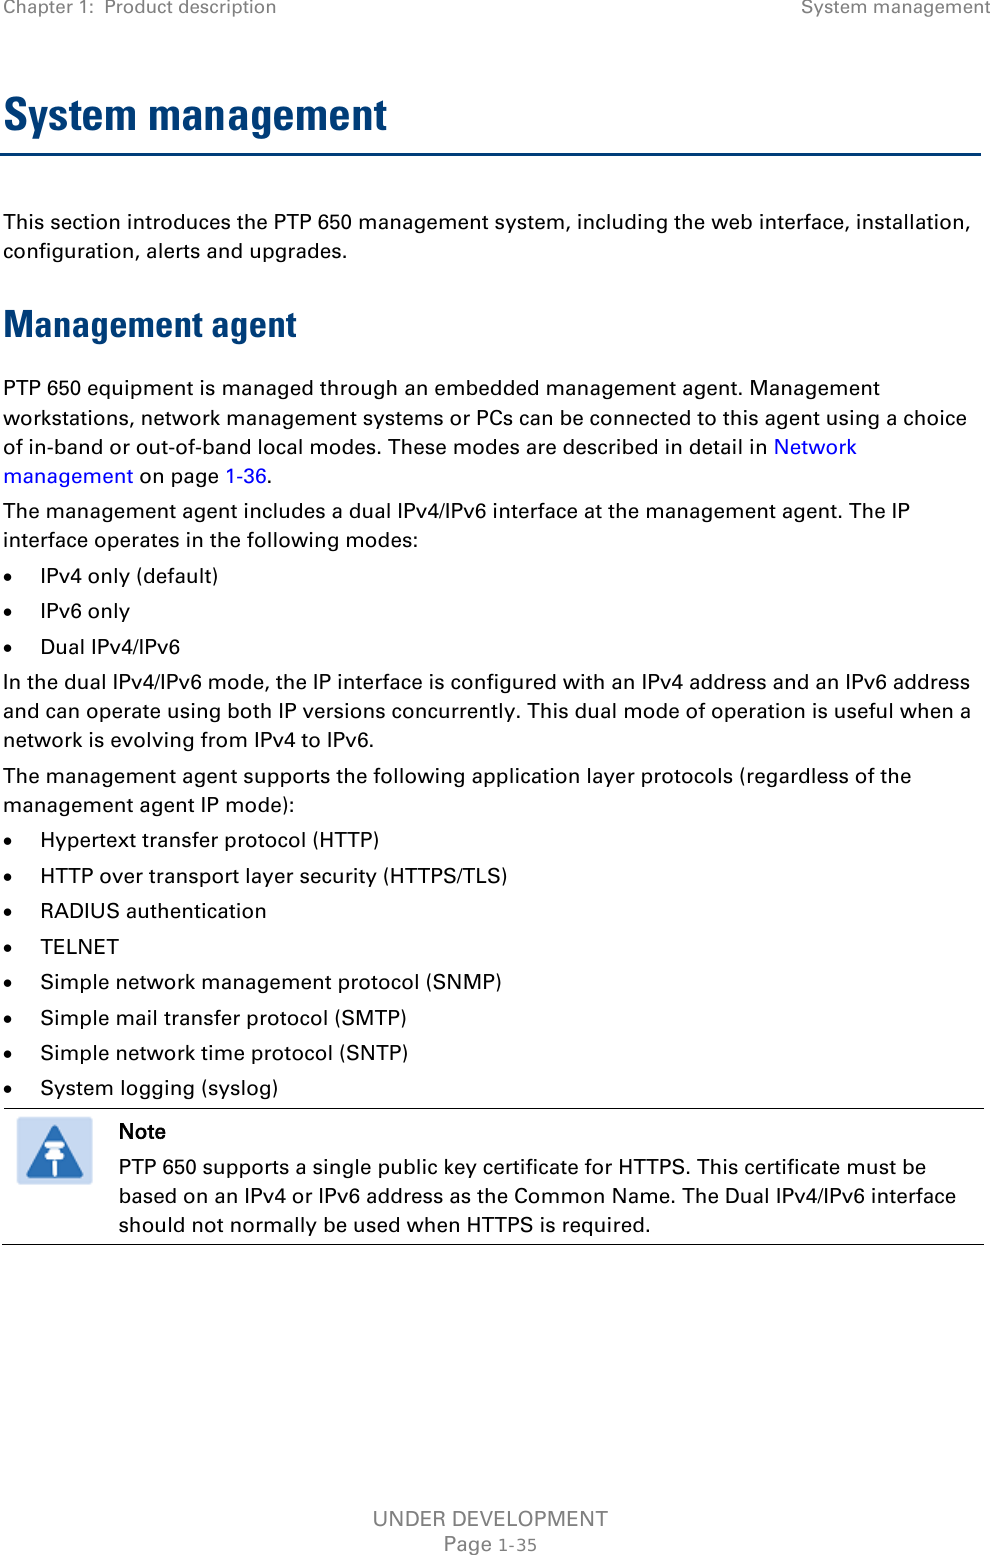 Chapter 1:  Product description System management  System management  This section introduces the PTP 650 management system, including the web interface, installation, configuration, alerts and upgrades. Management agent PTP 650 equipment is managed through an embedded management agent. Management workstations, network management systems or PCs can be connected to this agent using a choice of in-band or out-of-band local modes. These modes are described in detail in Network management on page 1-36. The management agent includes a dual IPv4/IPv6 interface at the management agent. The IP interface operates in the following modes: • IPv4 only (default) • IPv6 only • Dual IPv4/IPv6 In the dual IPv4/IPv6 mode, the IP interface is configured with an IPv4 address and an IPv6 address and can operate using both IP versions concurrently. This dual mode of operation is useful when a network is evolving from IPv4 to IPv6. The management agent supports the following application layer protocols (regardless of the management agent IP mode): • Hypertext transfer protocol (HTTP) • HTTP over transport layer security (HTTPS/TLS) • RADIUS authentication • TELNET • Simple network management protocol (SNMP) • Simple mail transfer protocol (SMTP) • Simple network time protocol (SNTP) • System logging (syslog)  Note PTP 650 supports a single public key certificate for HTTPS. This certificate must be based on an IPv4 or IPv6 address as the Common Name. The Dual IPv4/IPv6 interface should not normally be used when HTTPS is required.    UNDER DEVELOPMENT Page 1-35 